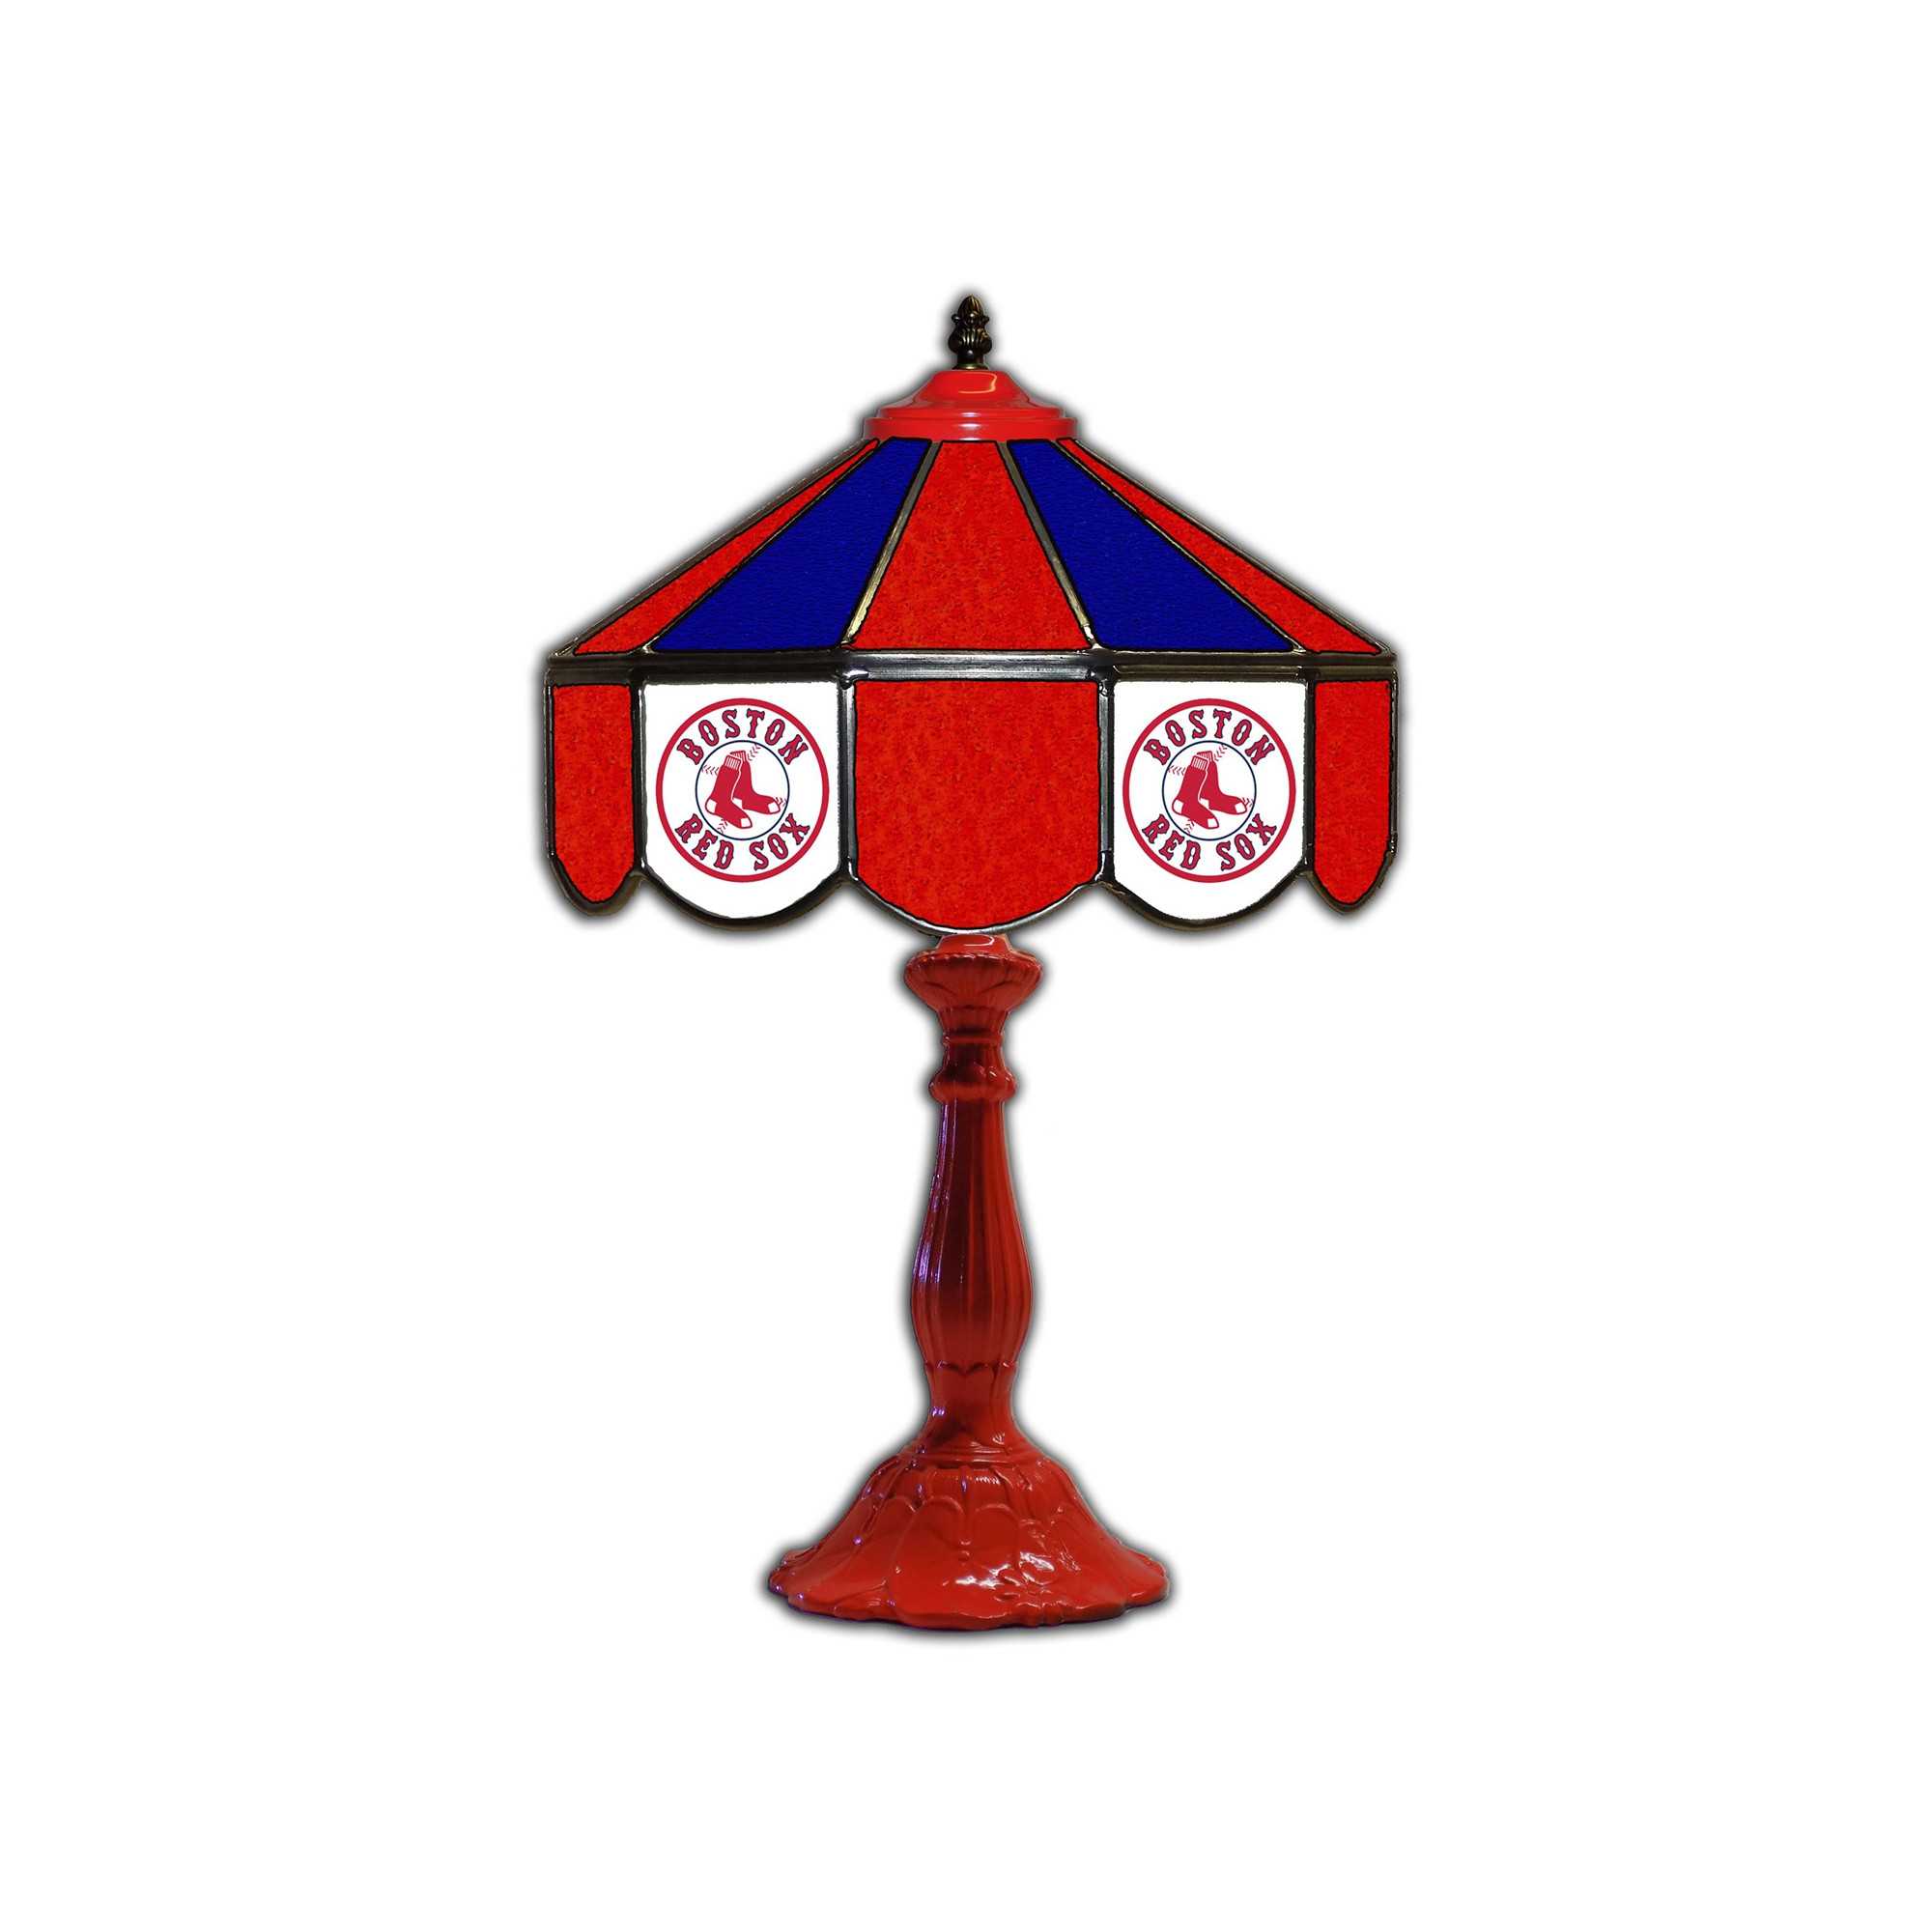 BOSTON RED SOX 21" GLASS TABLE LAMP